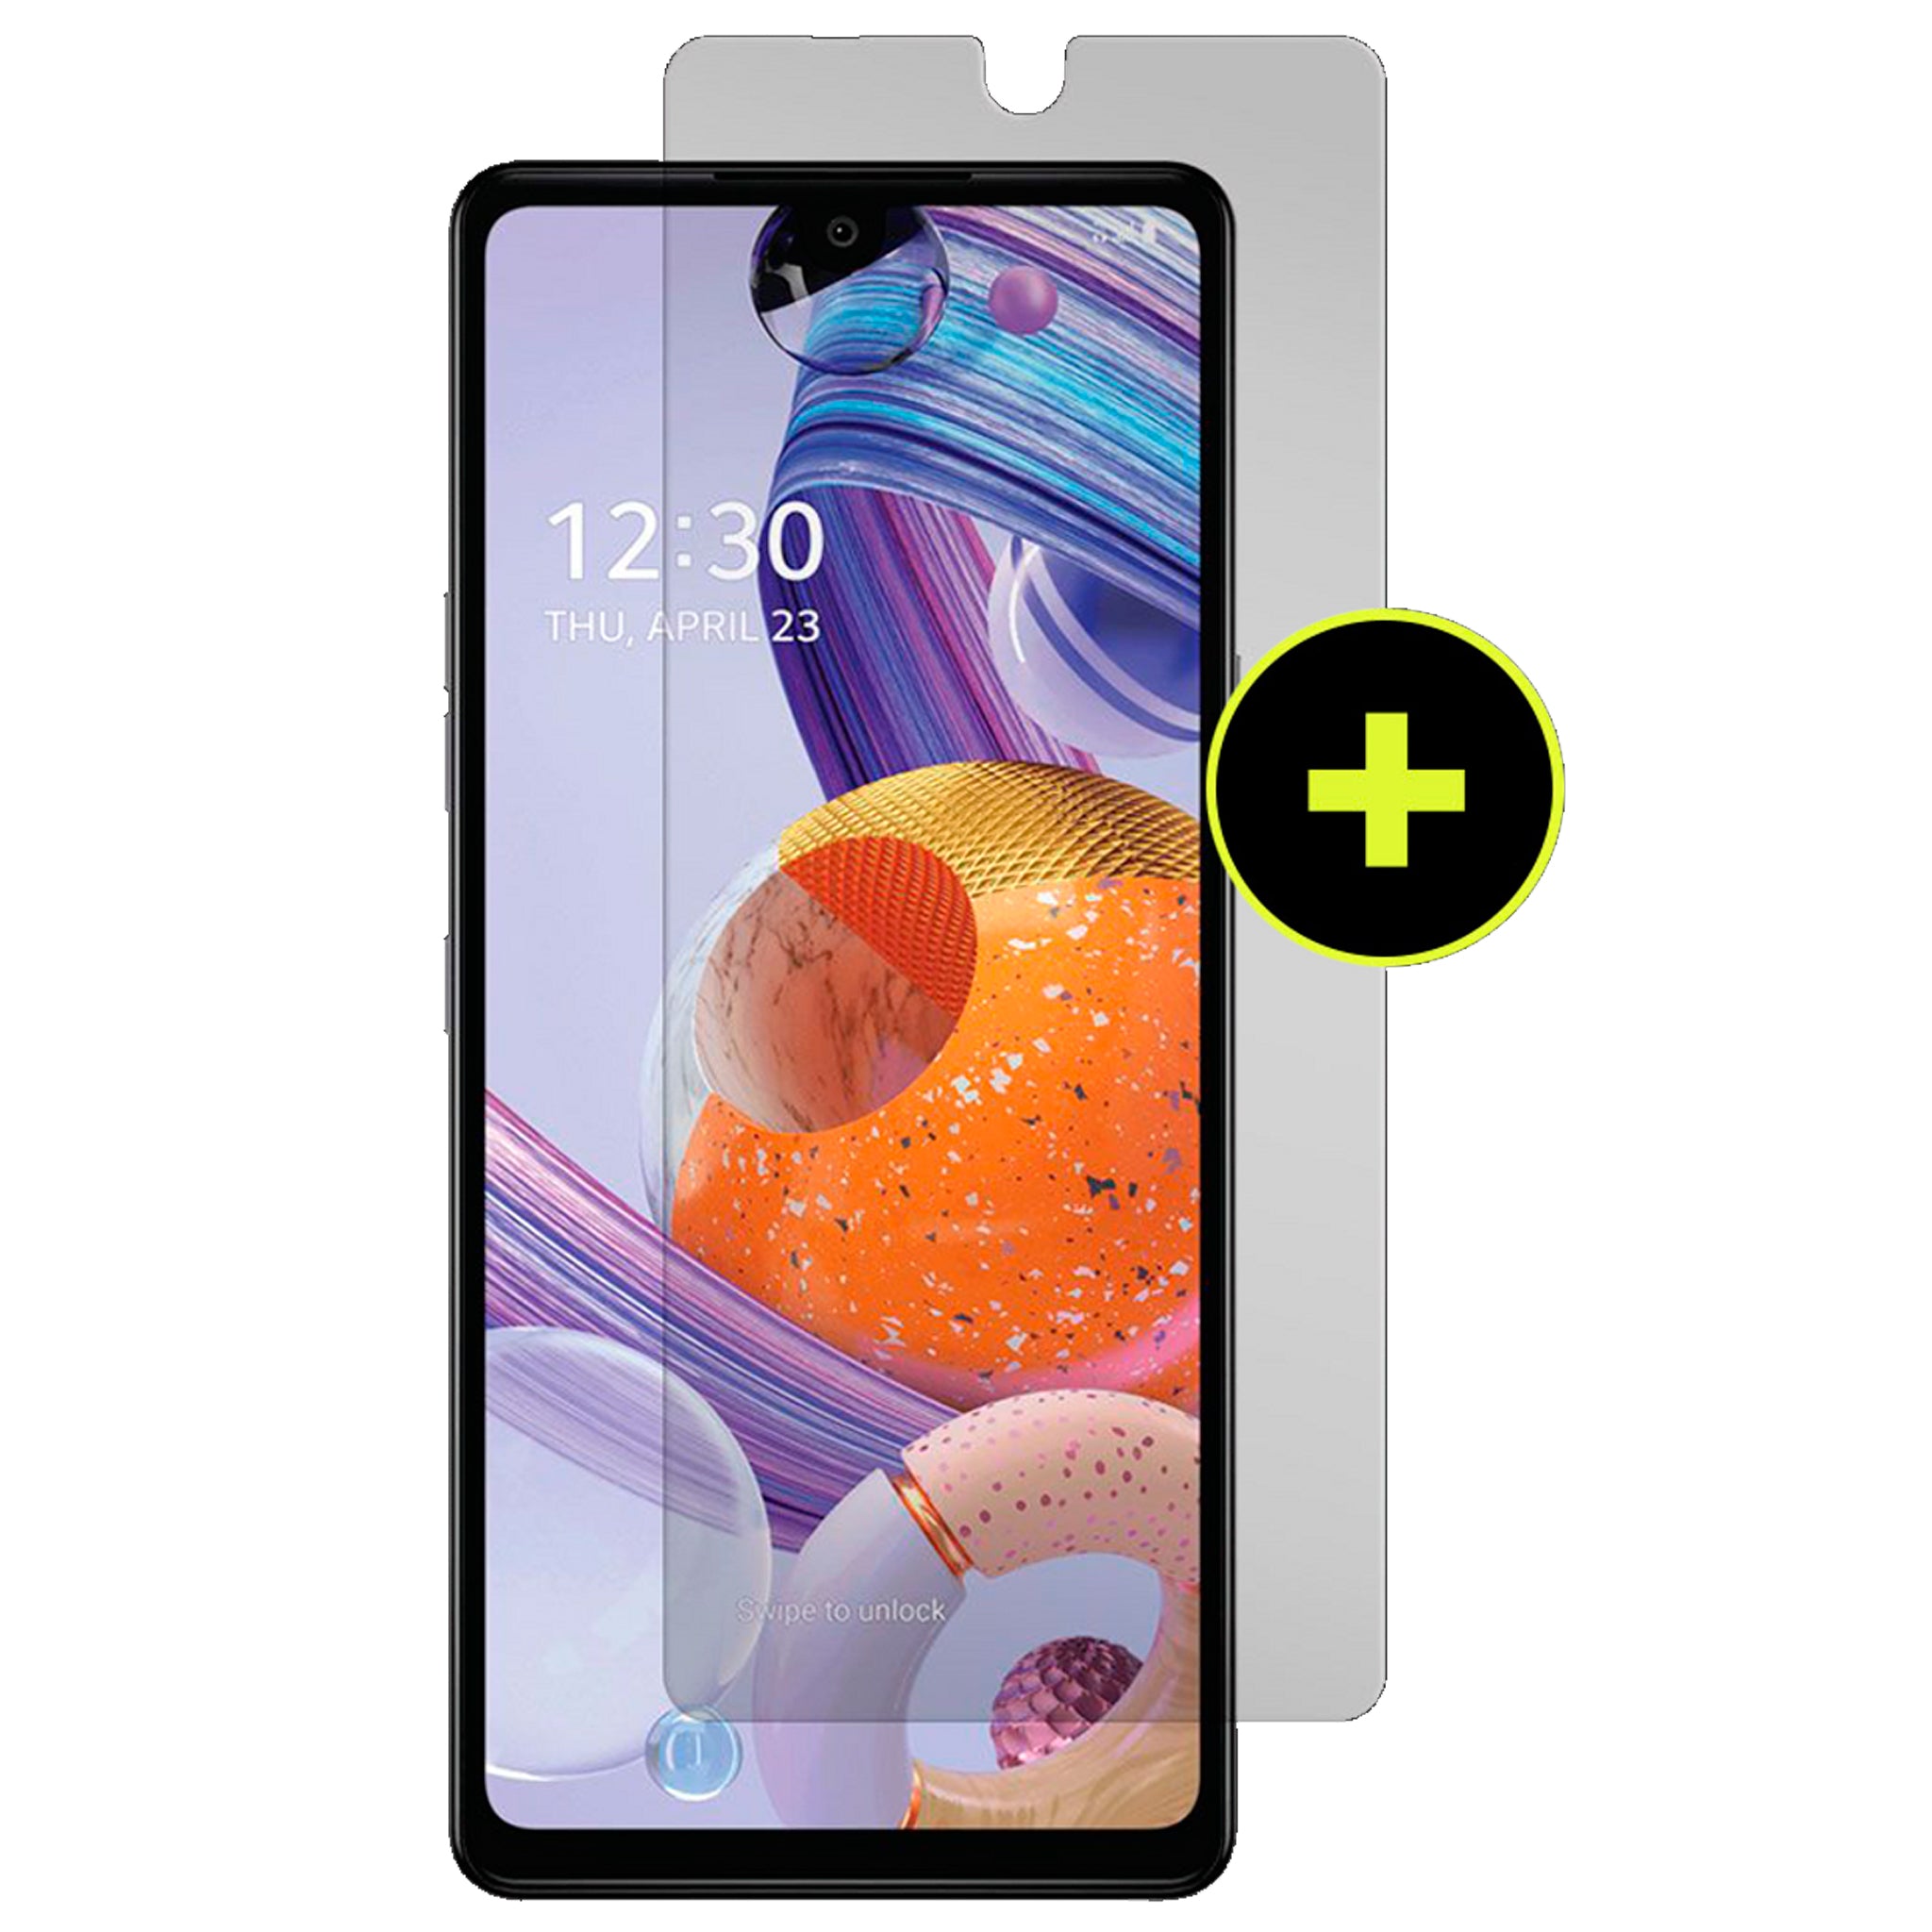 Gadget Guard - Black Ice Plus $150 Guarantee Glass Screen Protector For Lg Stylo 6 - Clear